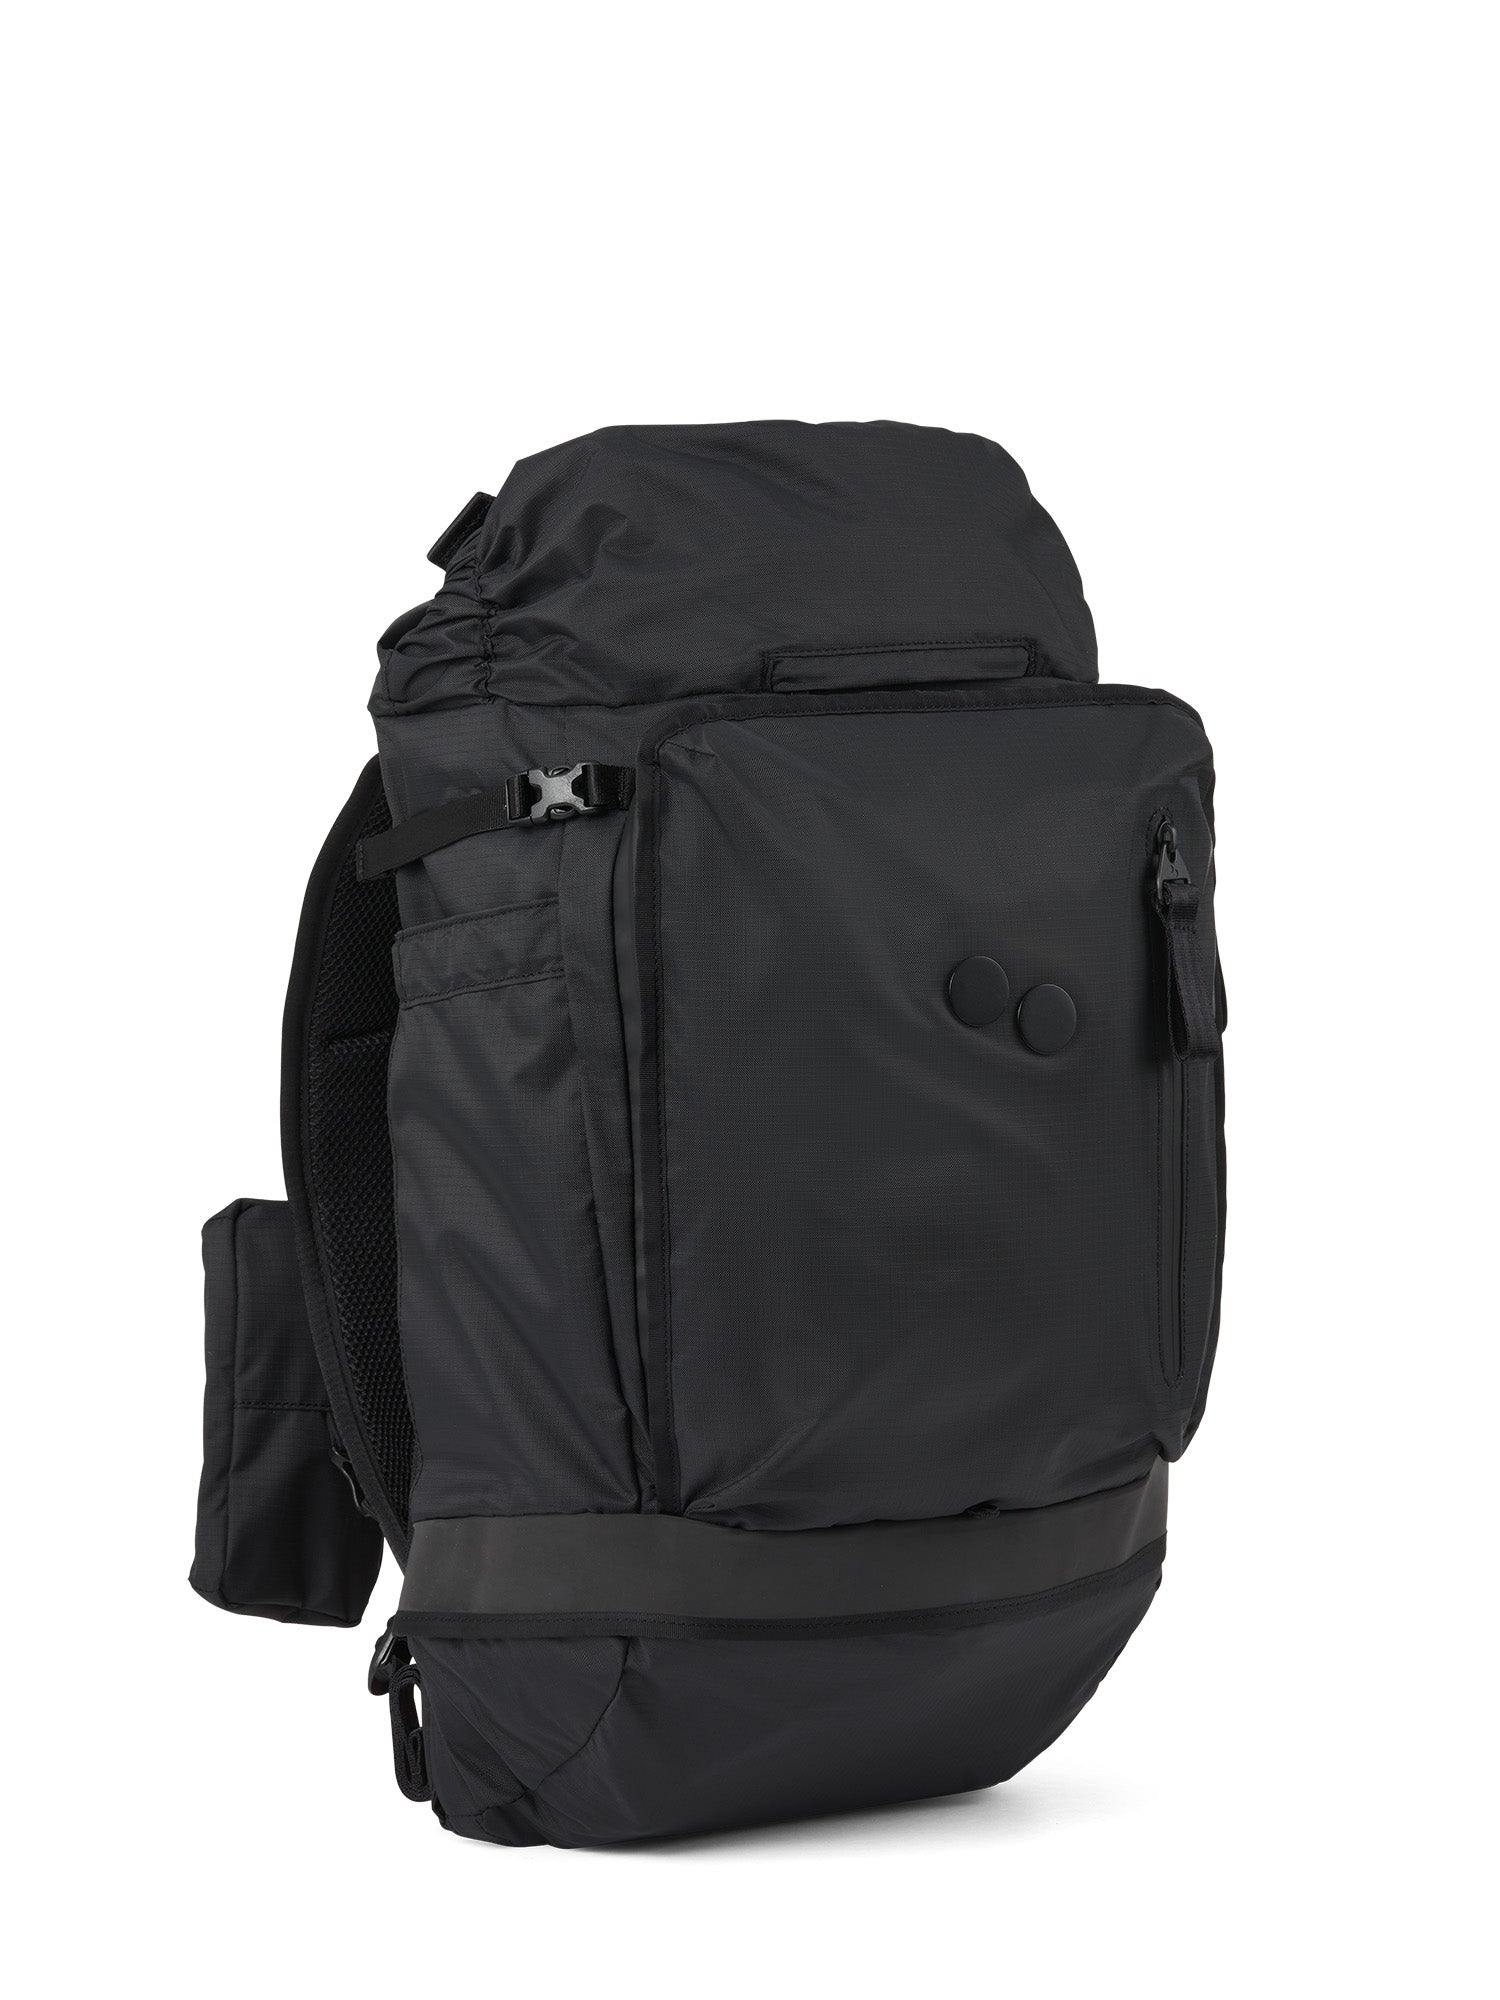 Komut Medium - Your ideal backpack for commuting and traveling ✓ – pinqponq